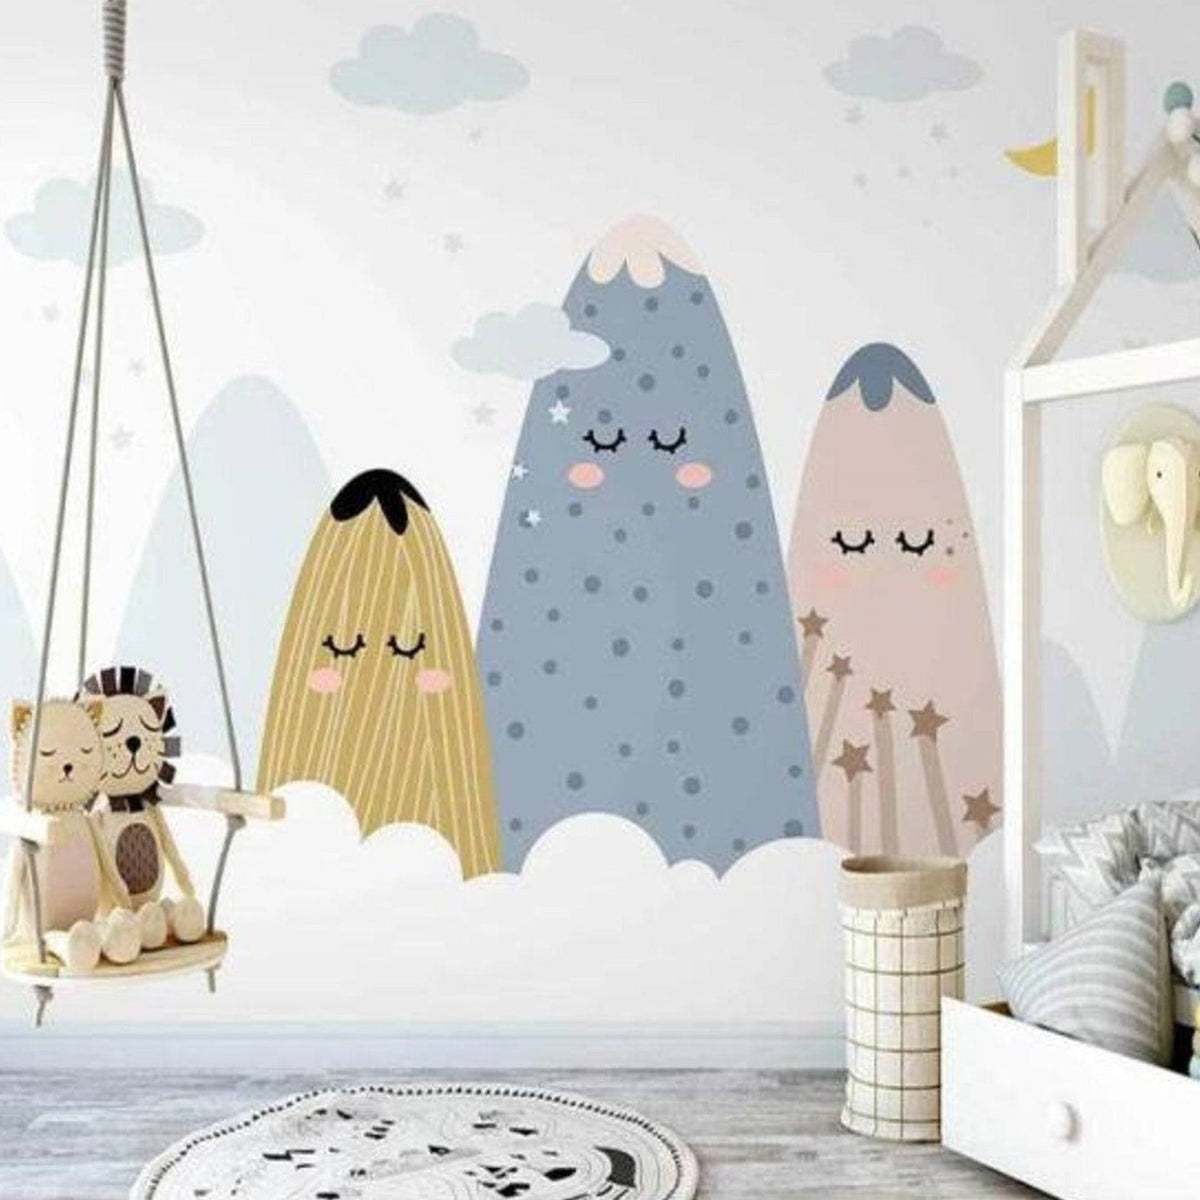 Sleepy Mountains and Moon Wall Mural for Baby Room-ChandeliersDecor